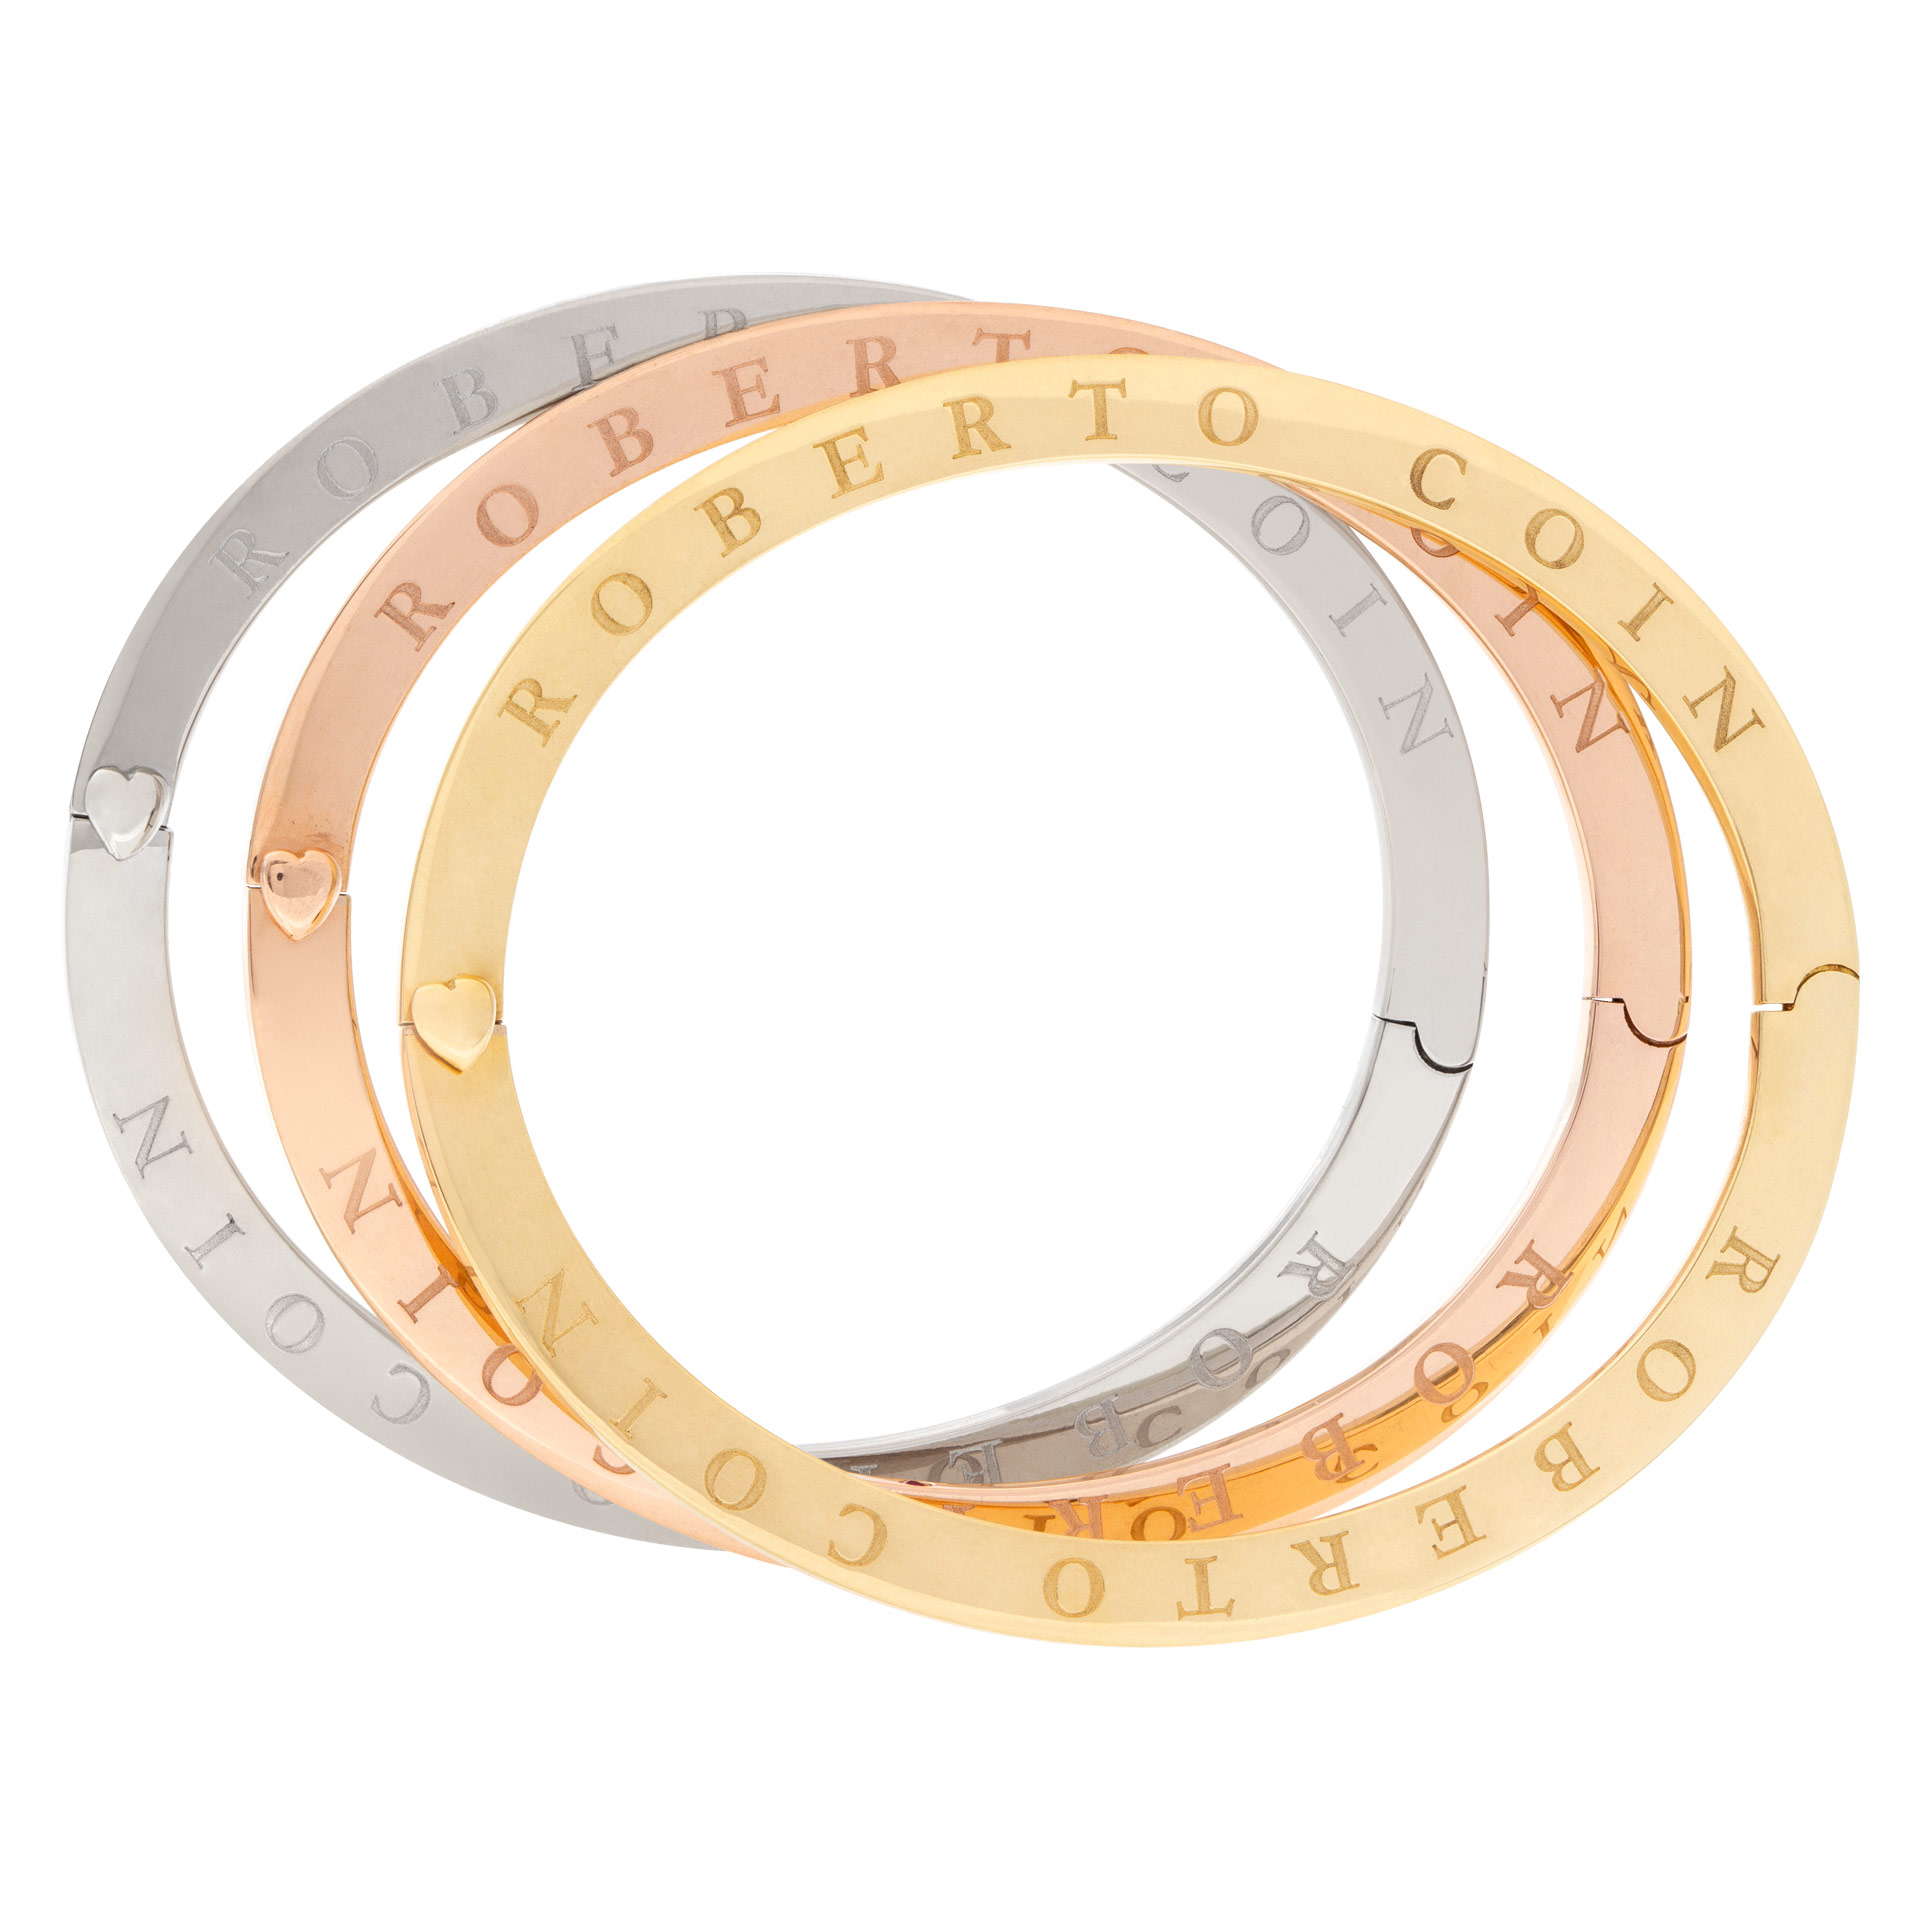 Set of 3 Roberto Coin hinged bangles in 18k yellow, white & rose gold